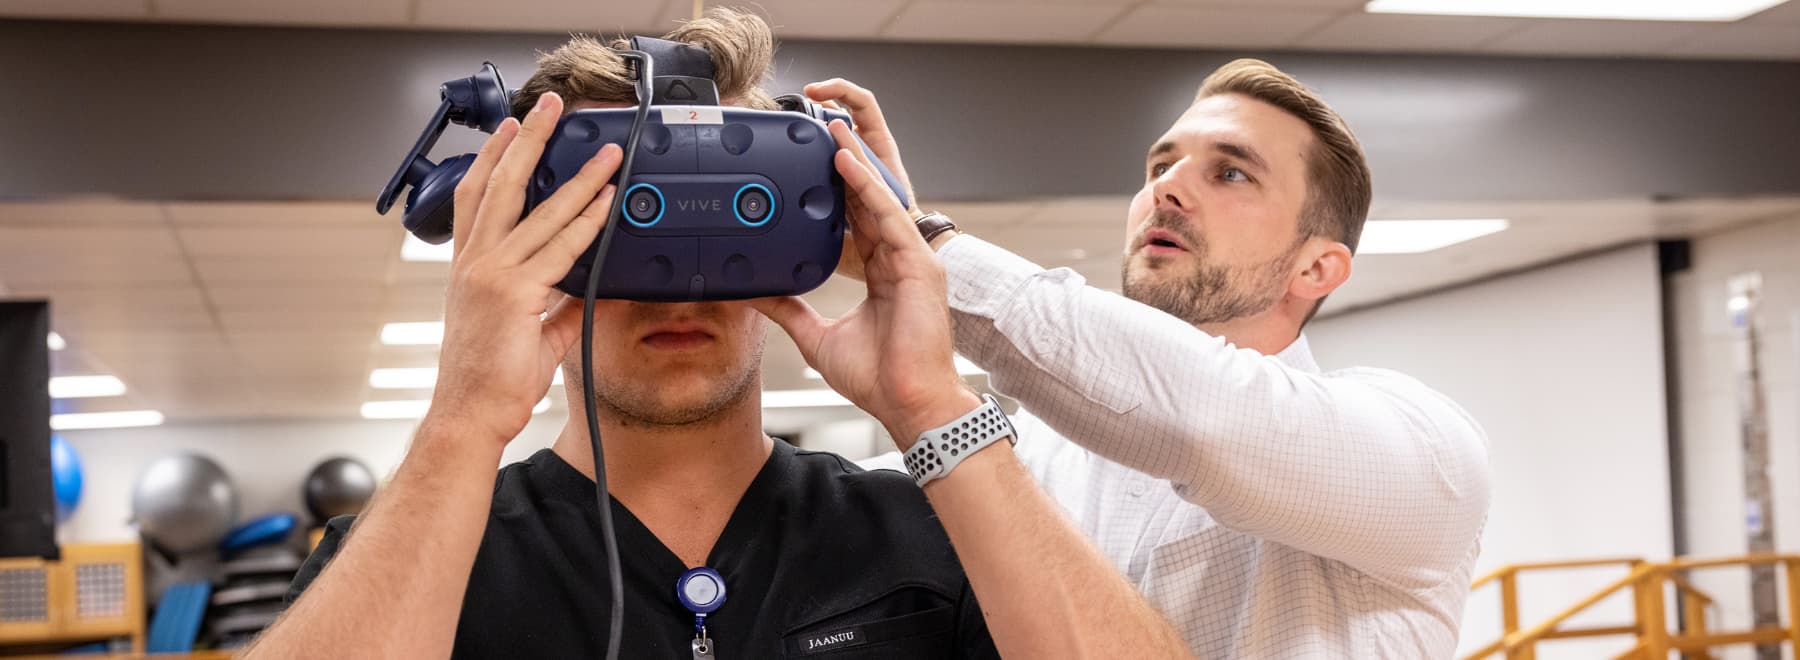 Dr. Jacob Daniels assists PT student Jacob Lape, of Jackson, in fitting a VR headset used to help study neurological reactions in concussion studies.